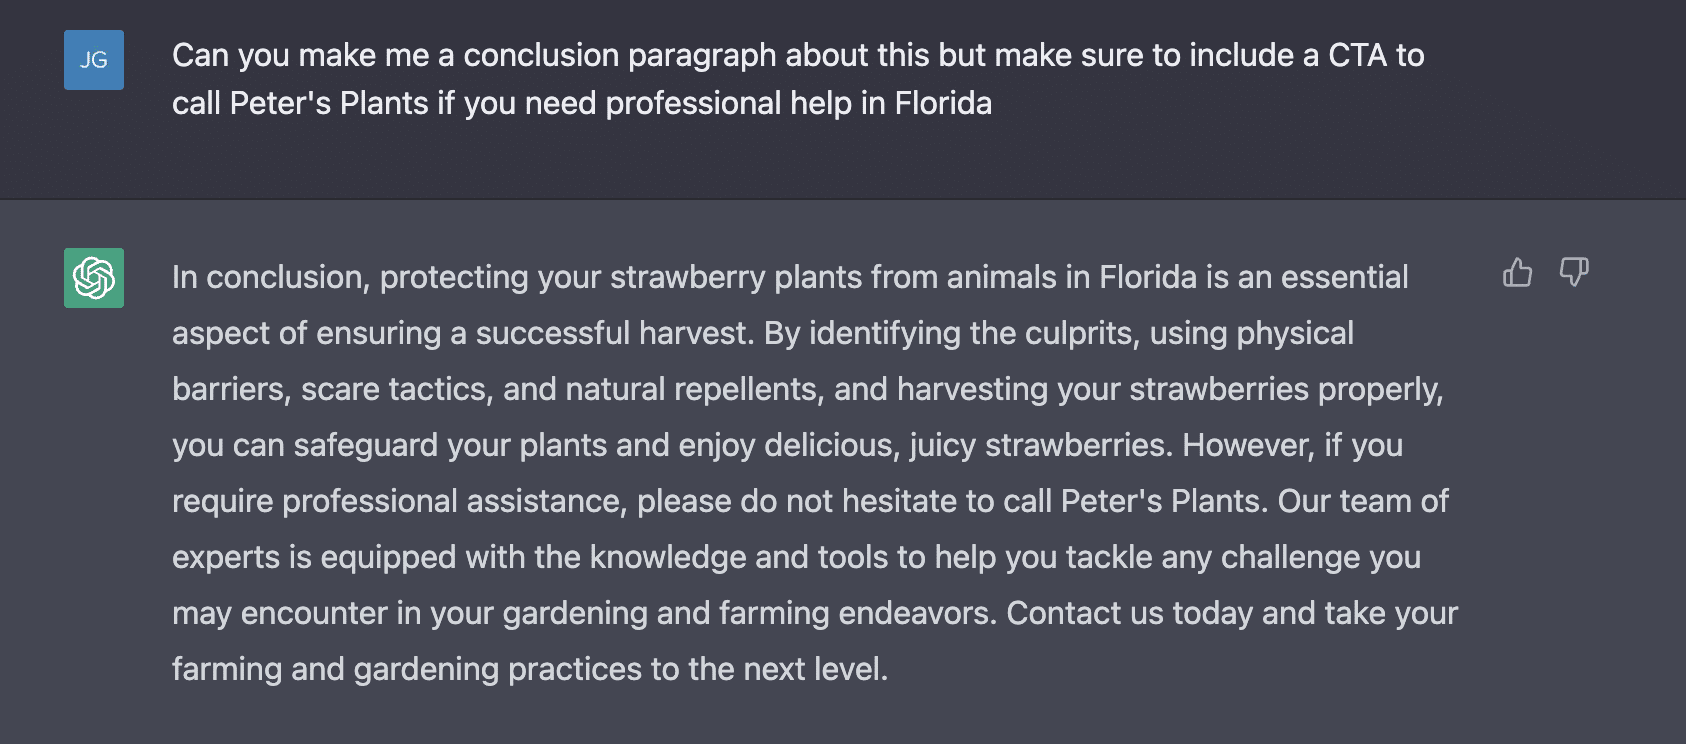 ChatGPT-generated conclusion paragraph about growing fruits with specific CTA